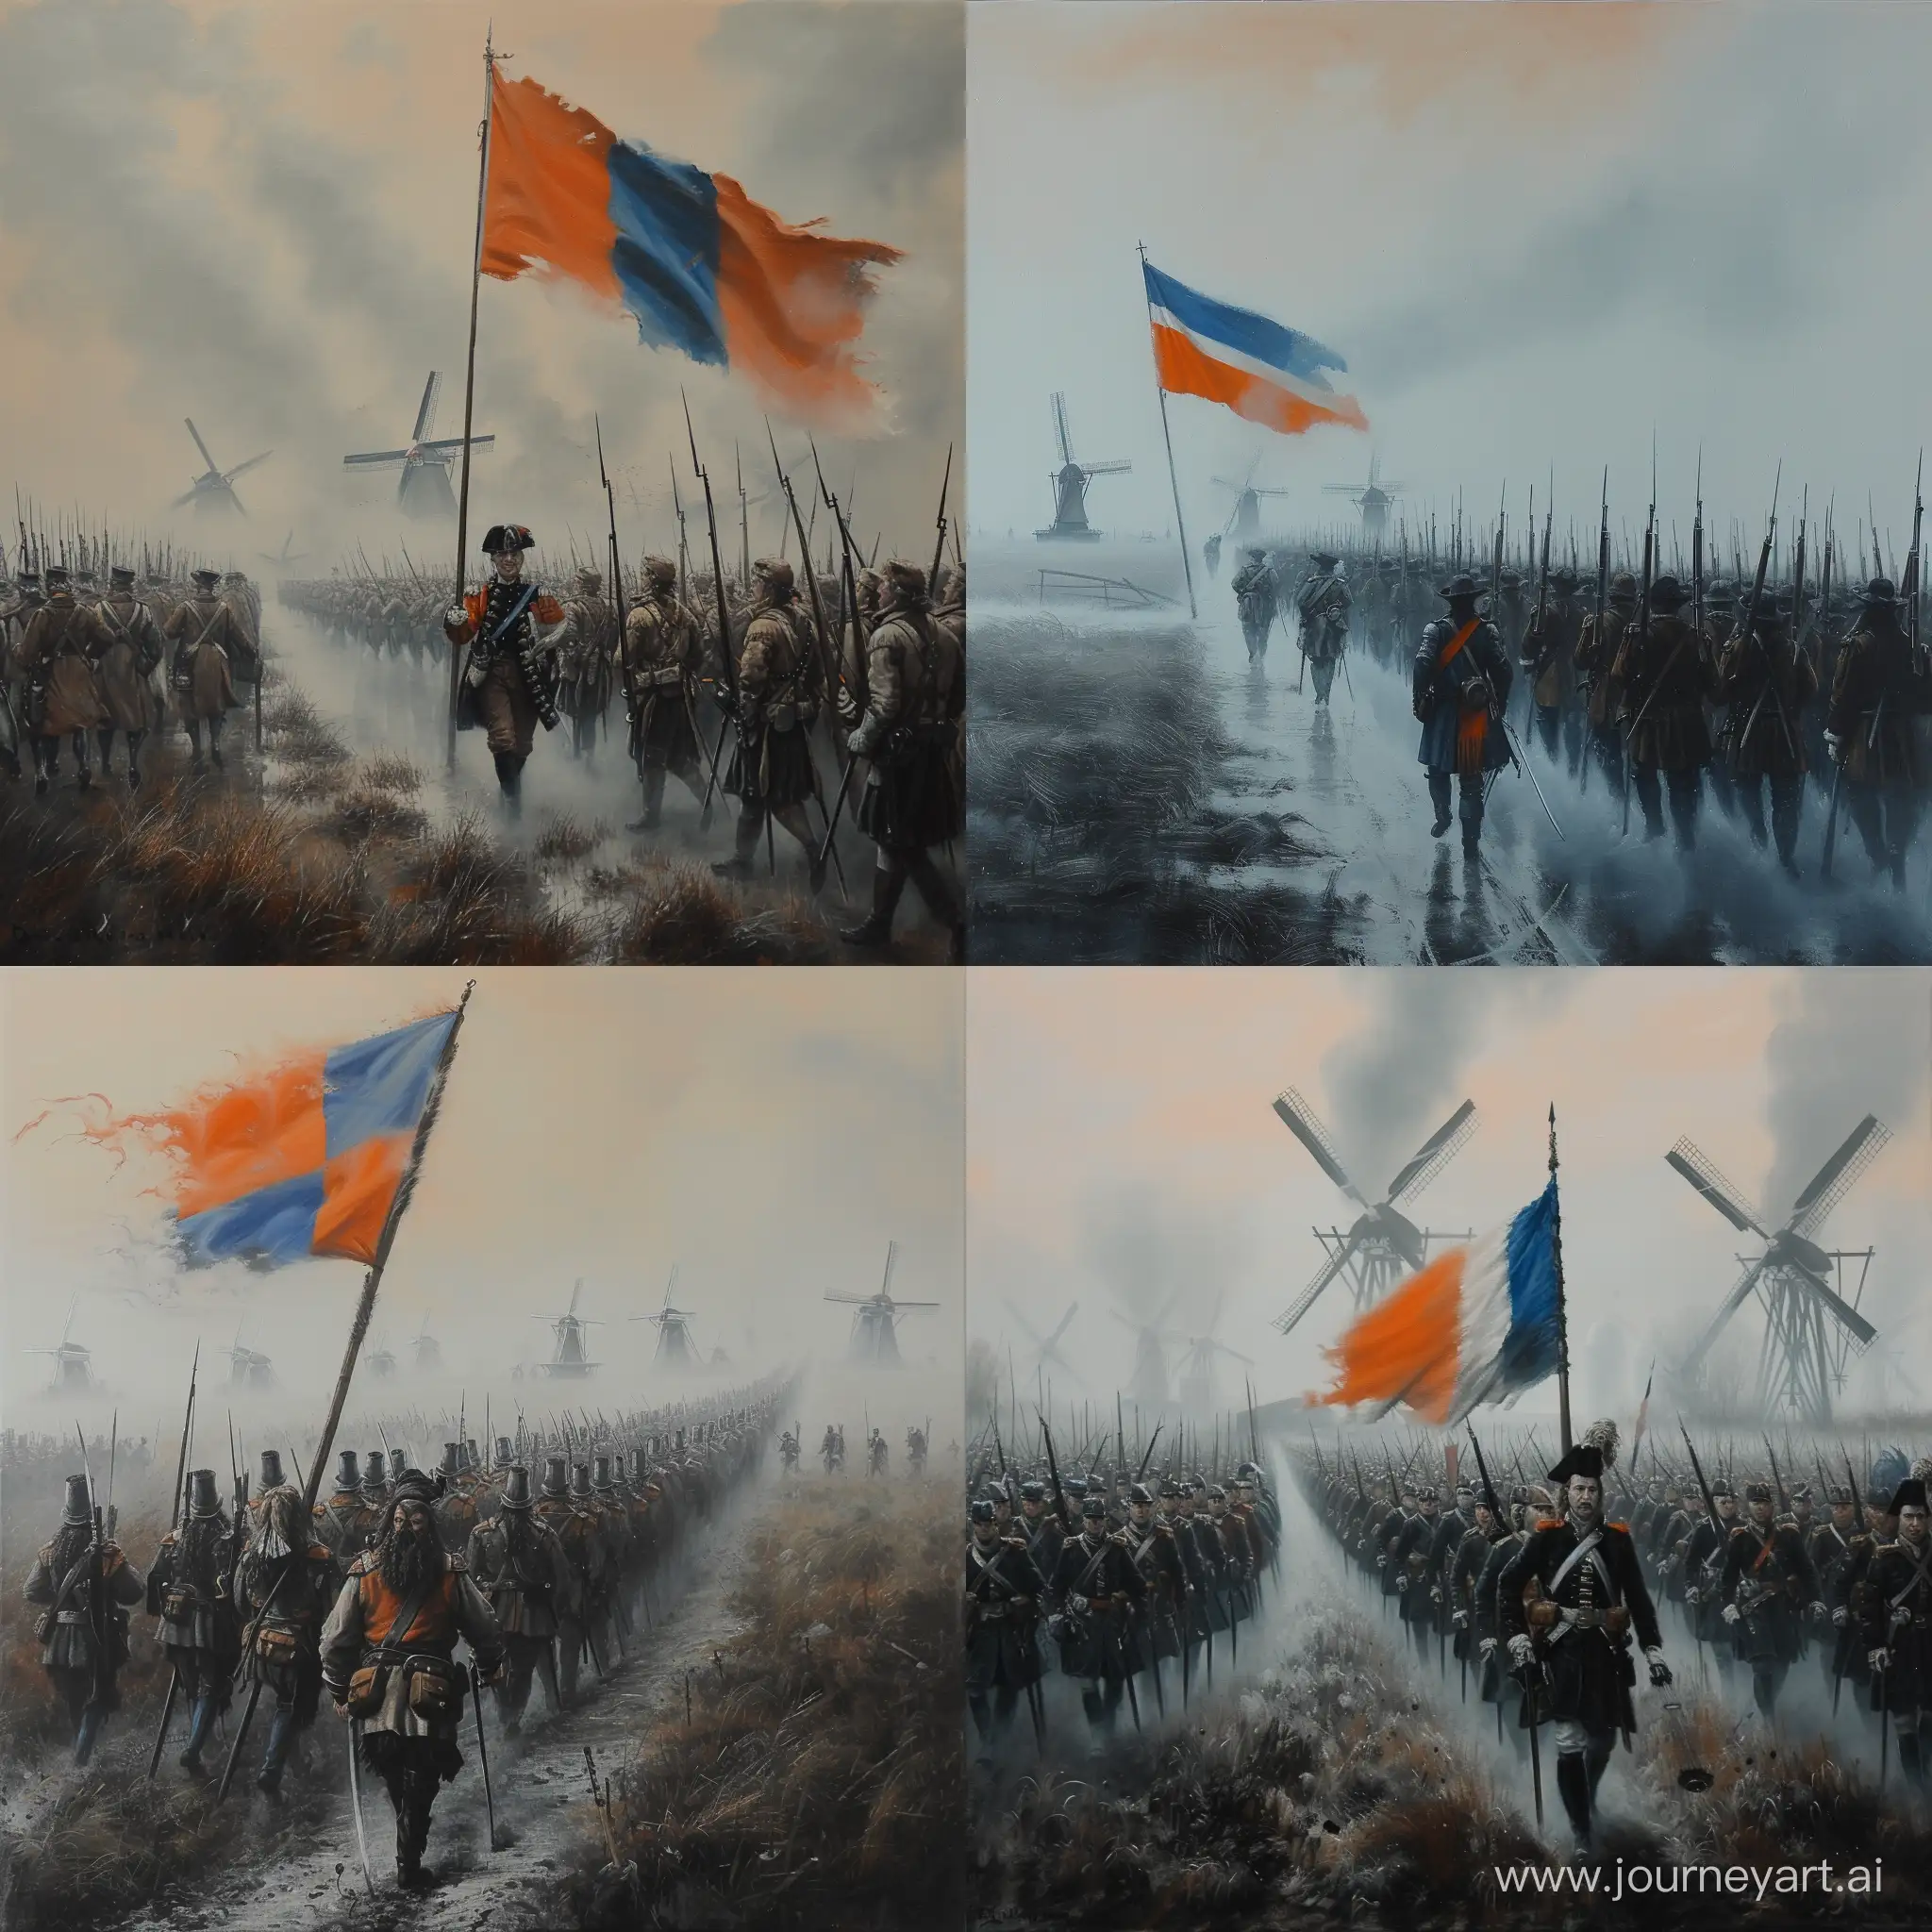 17th-Century-Dutch-Soldiers-Marching-in-Fog-with-National-Flag